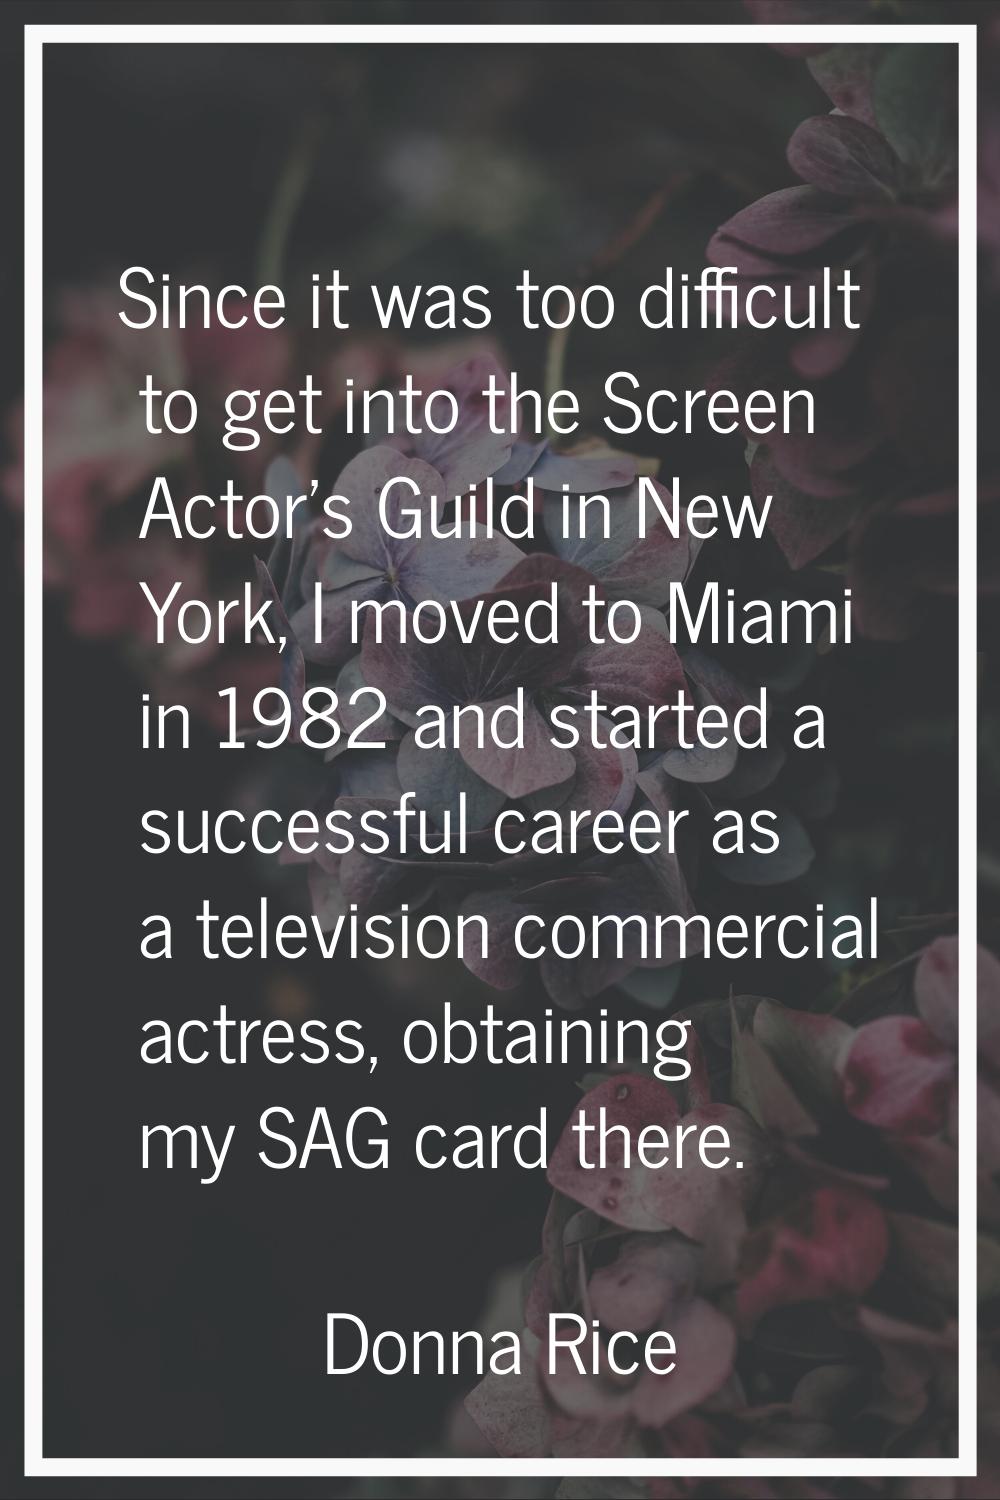 Since it was too difficult to get into the Screen Actor's Guild in New York, I moved to Miami in 19